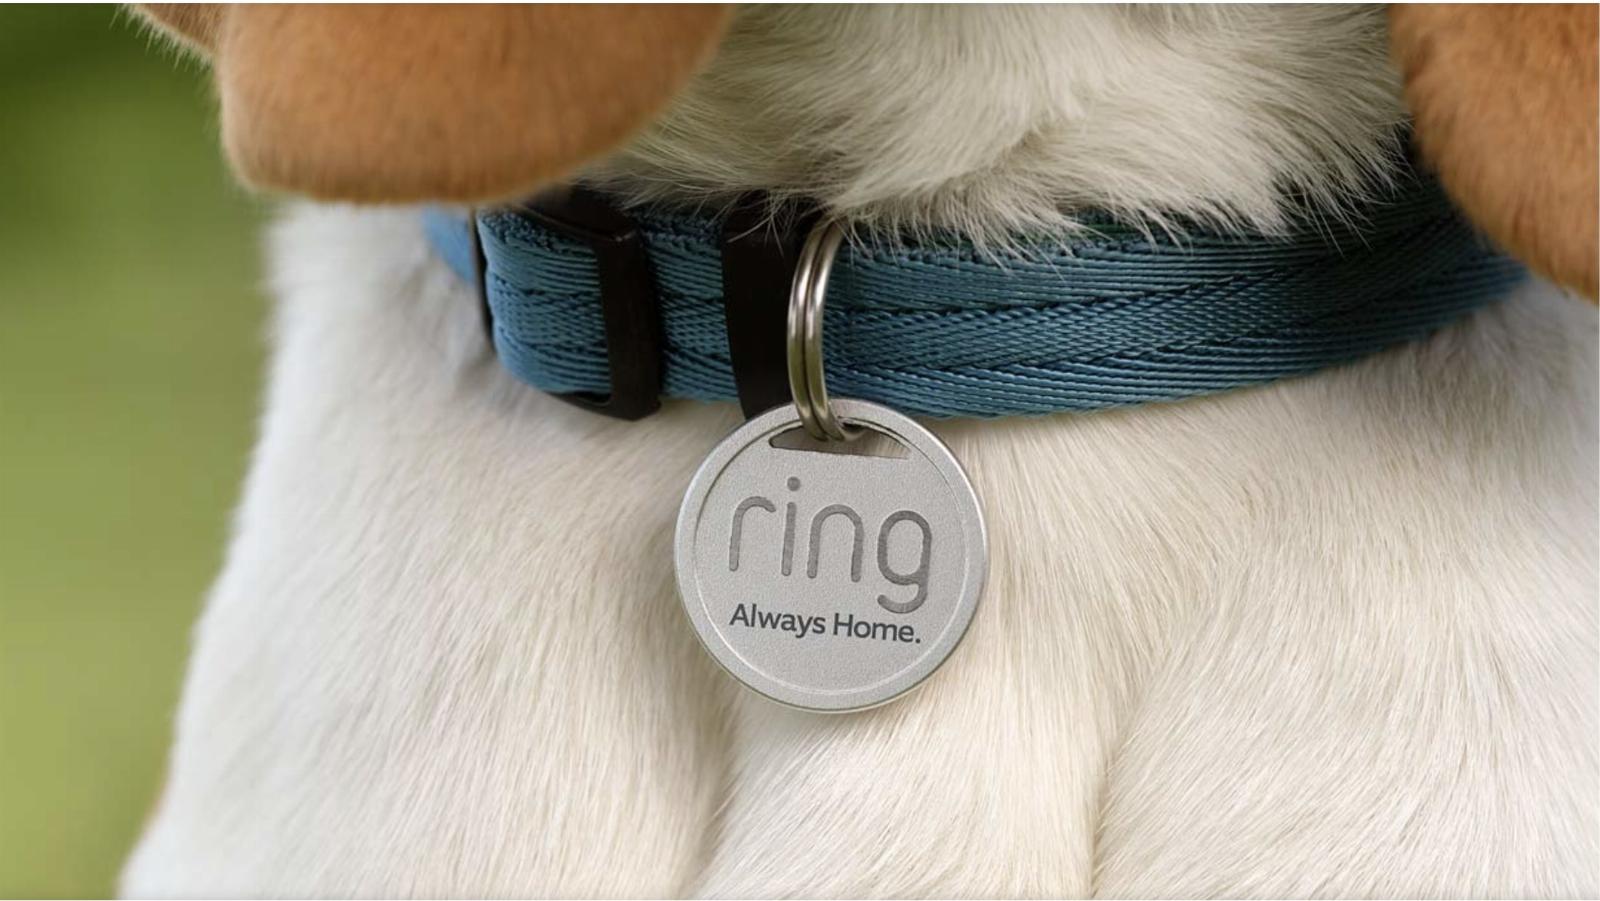 Ring’s new Pet Tag accessory helps reunite lost pets with their owners